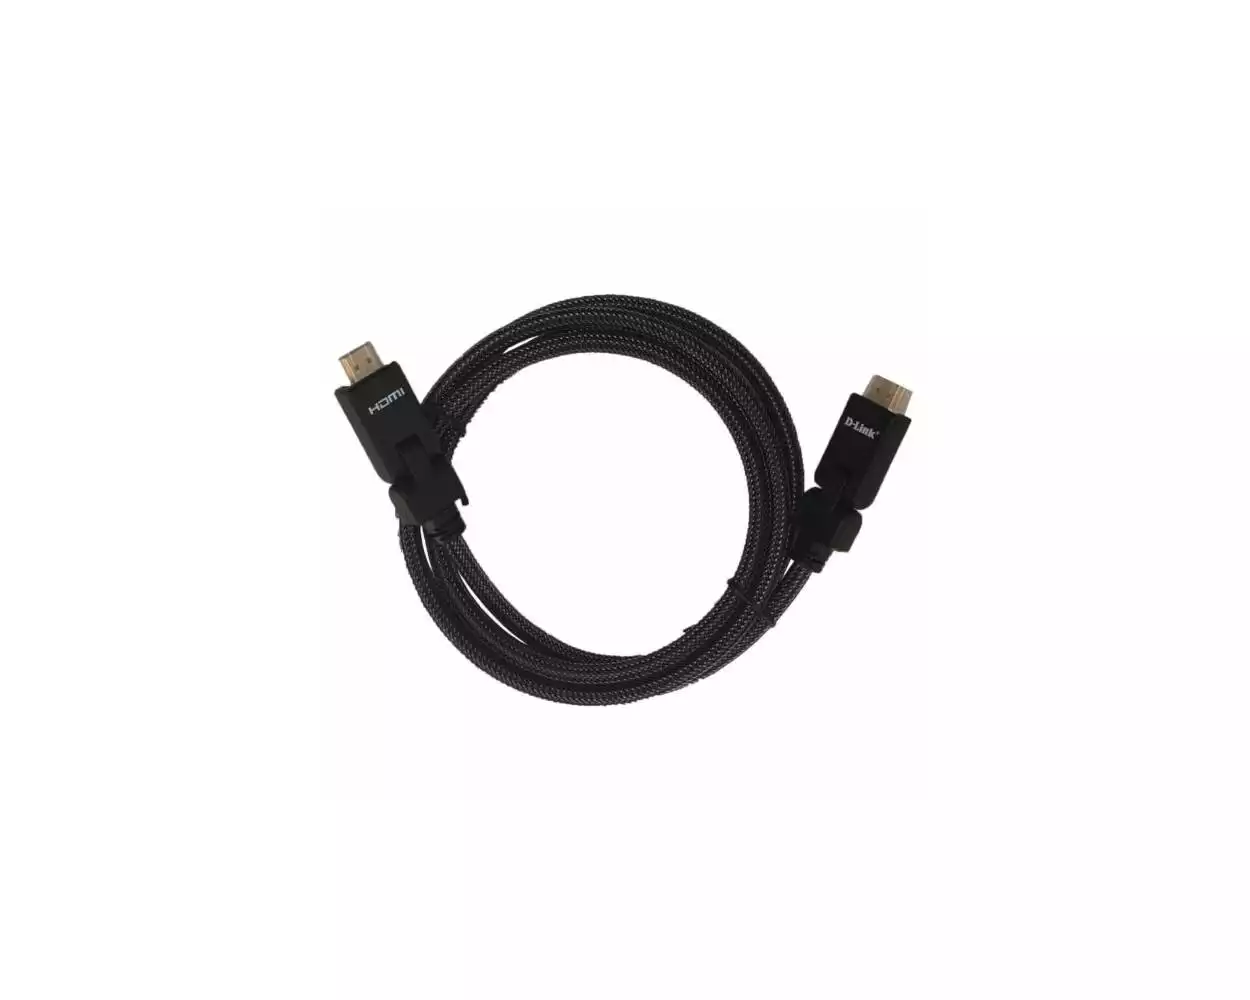 D-LINK HDMI 3 METER GOLD PLATED 90 DEGREE WITH 3D SUPPORT HDMI CABLE